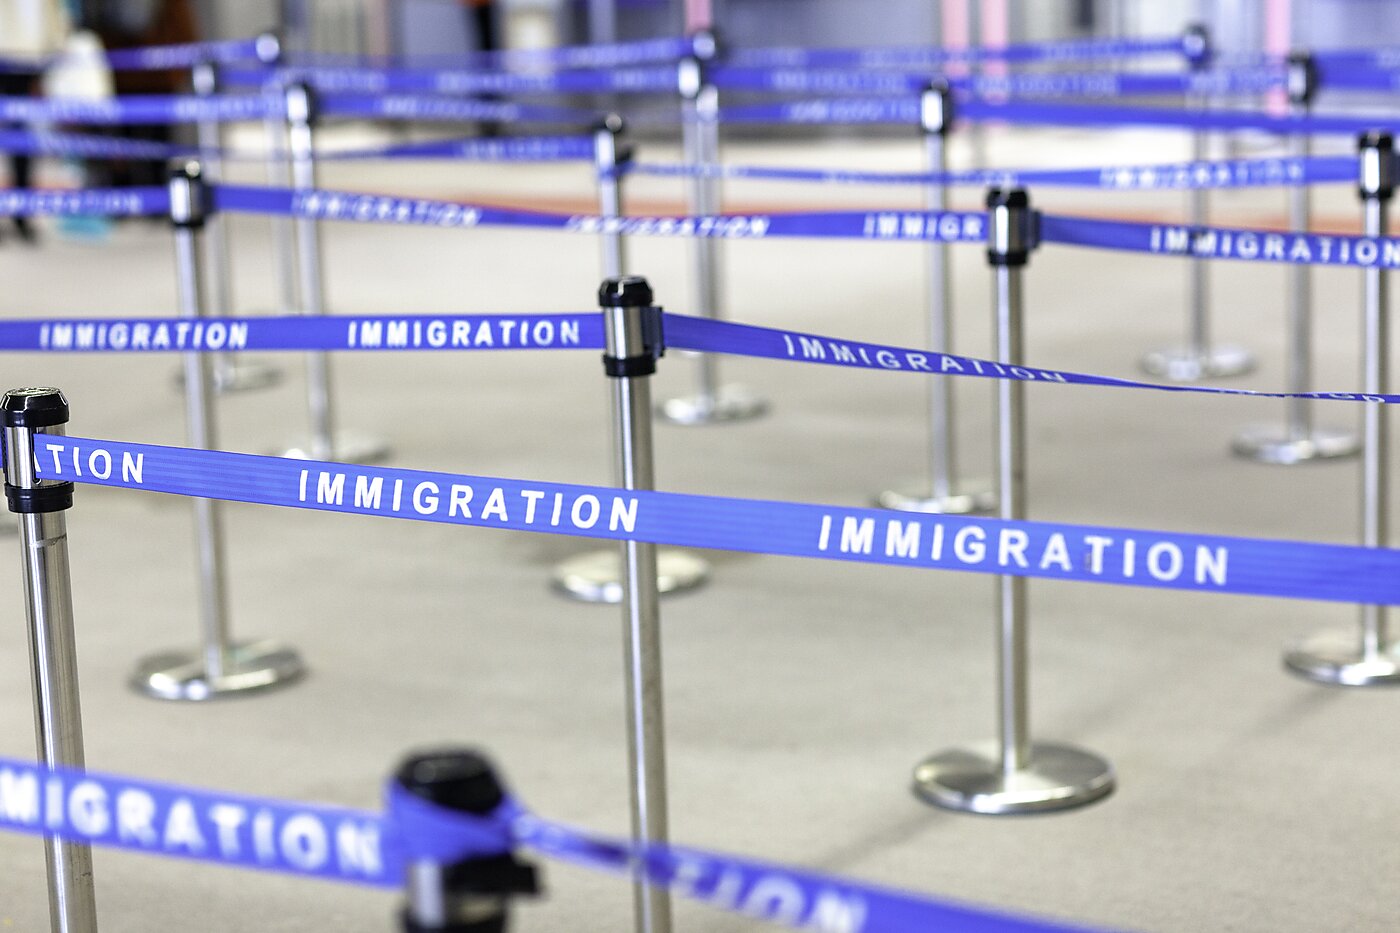 USCIS issues proposed STEM OPT extension rule - Hacking